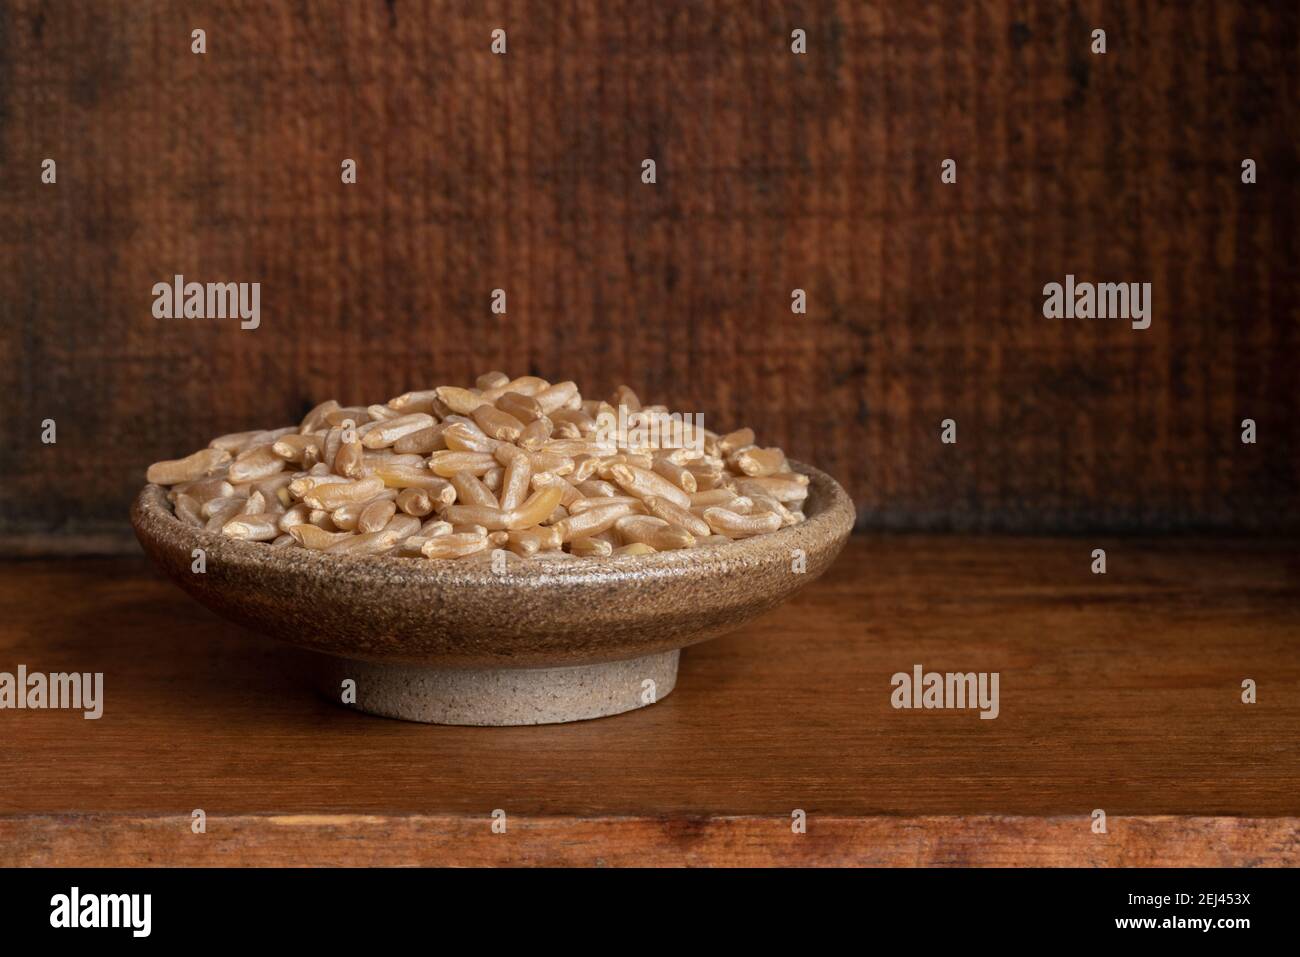 Uncooked Kamut Grain in a Bowl Stock Photo